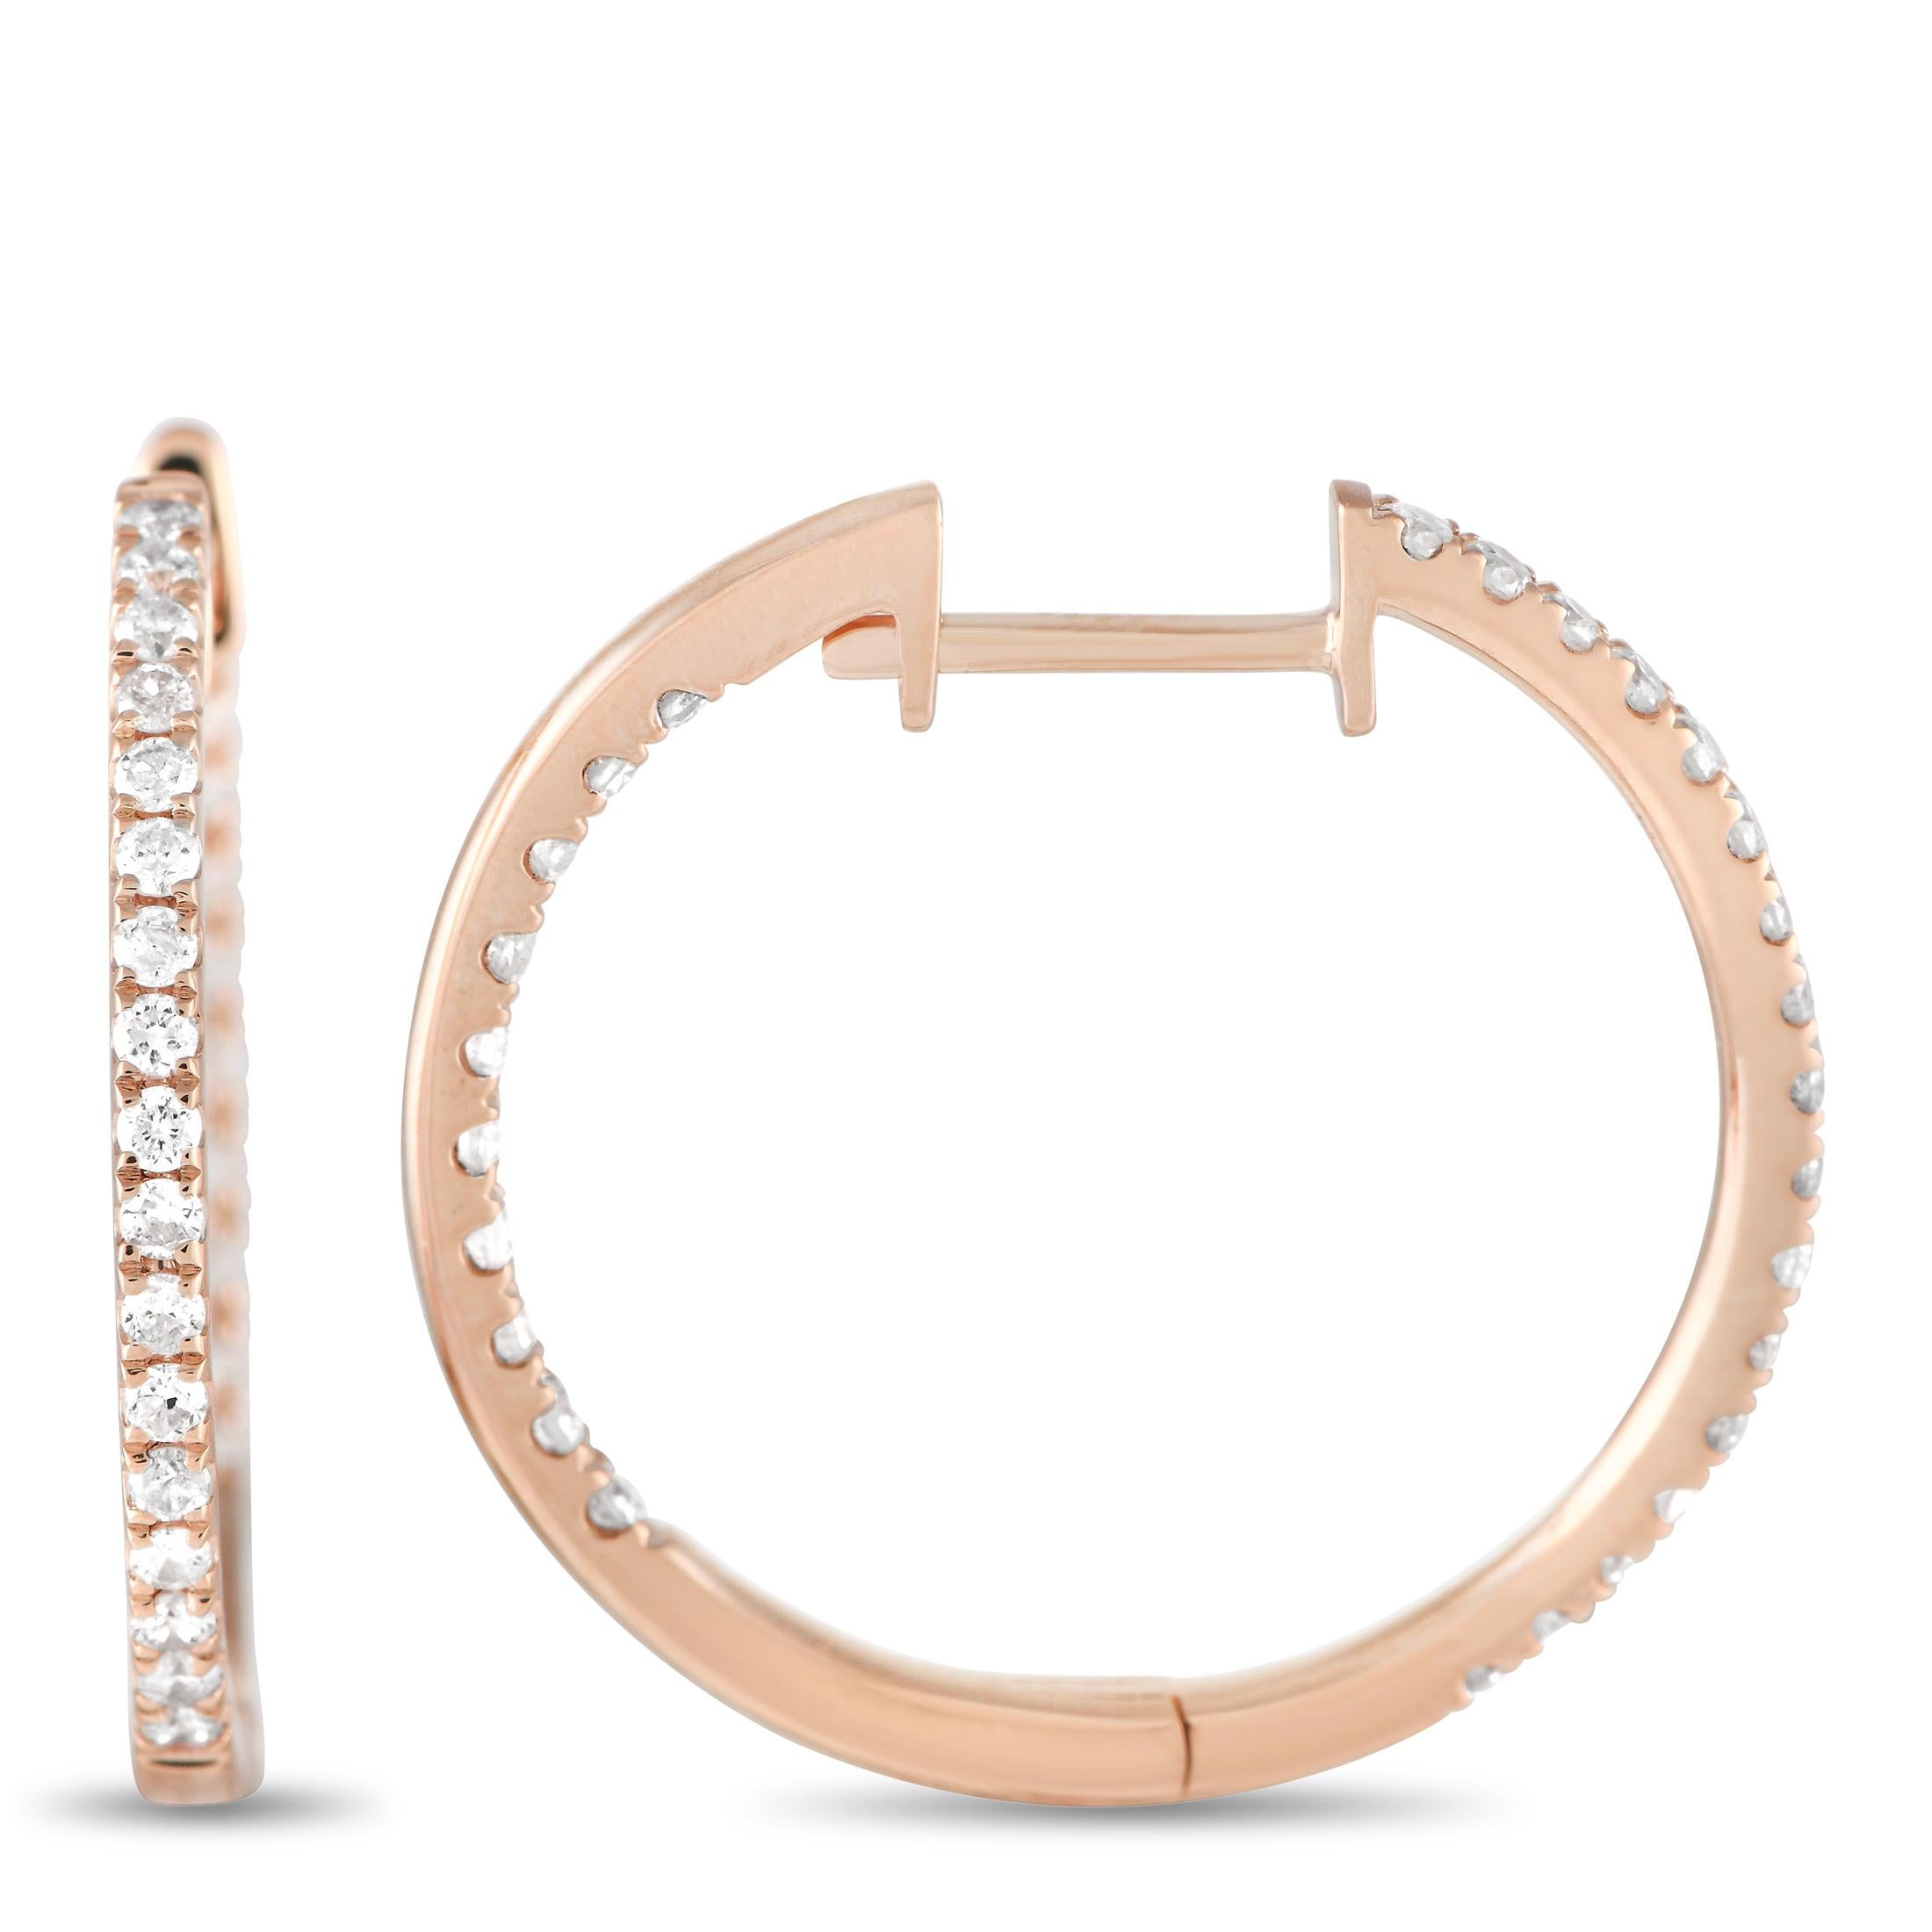 These dazzling hoop earrings are poised to put the perfect finishing touch on any ensemble. Diamonds with a total weight of 0.50 carats sparkle on seemingly every inch of these elegant earrings. Each one features a 14K rose gold setting and measures